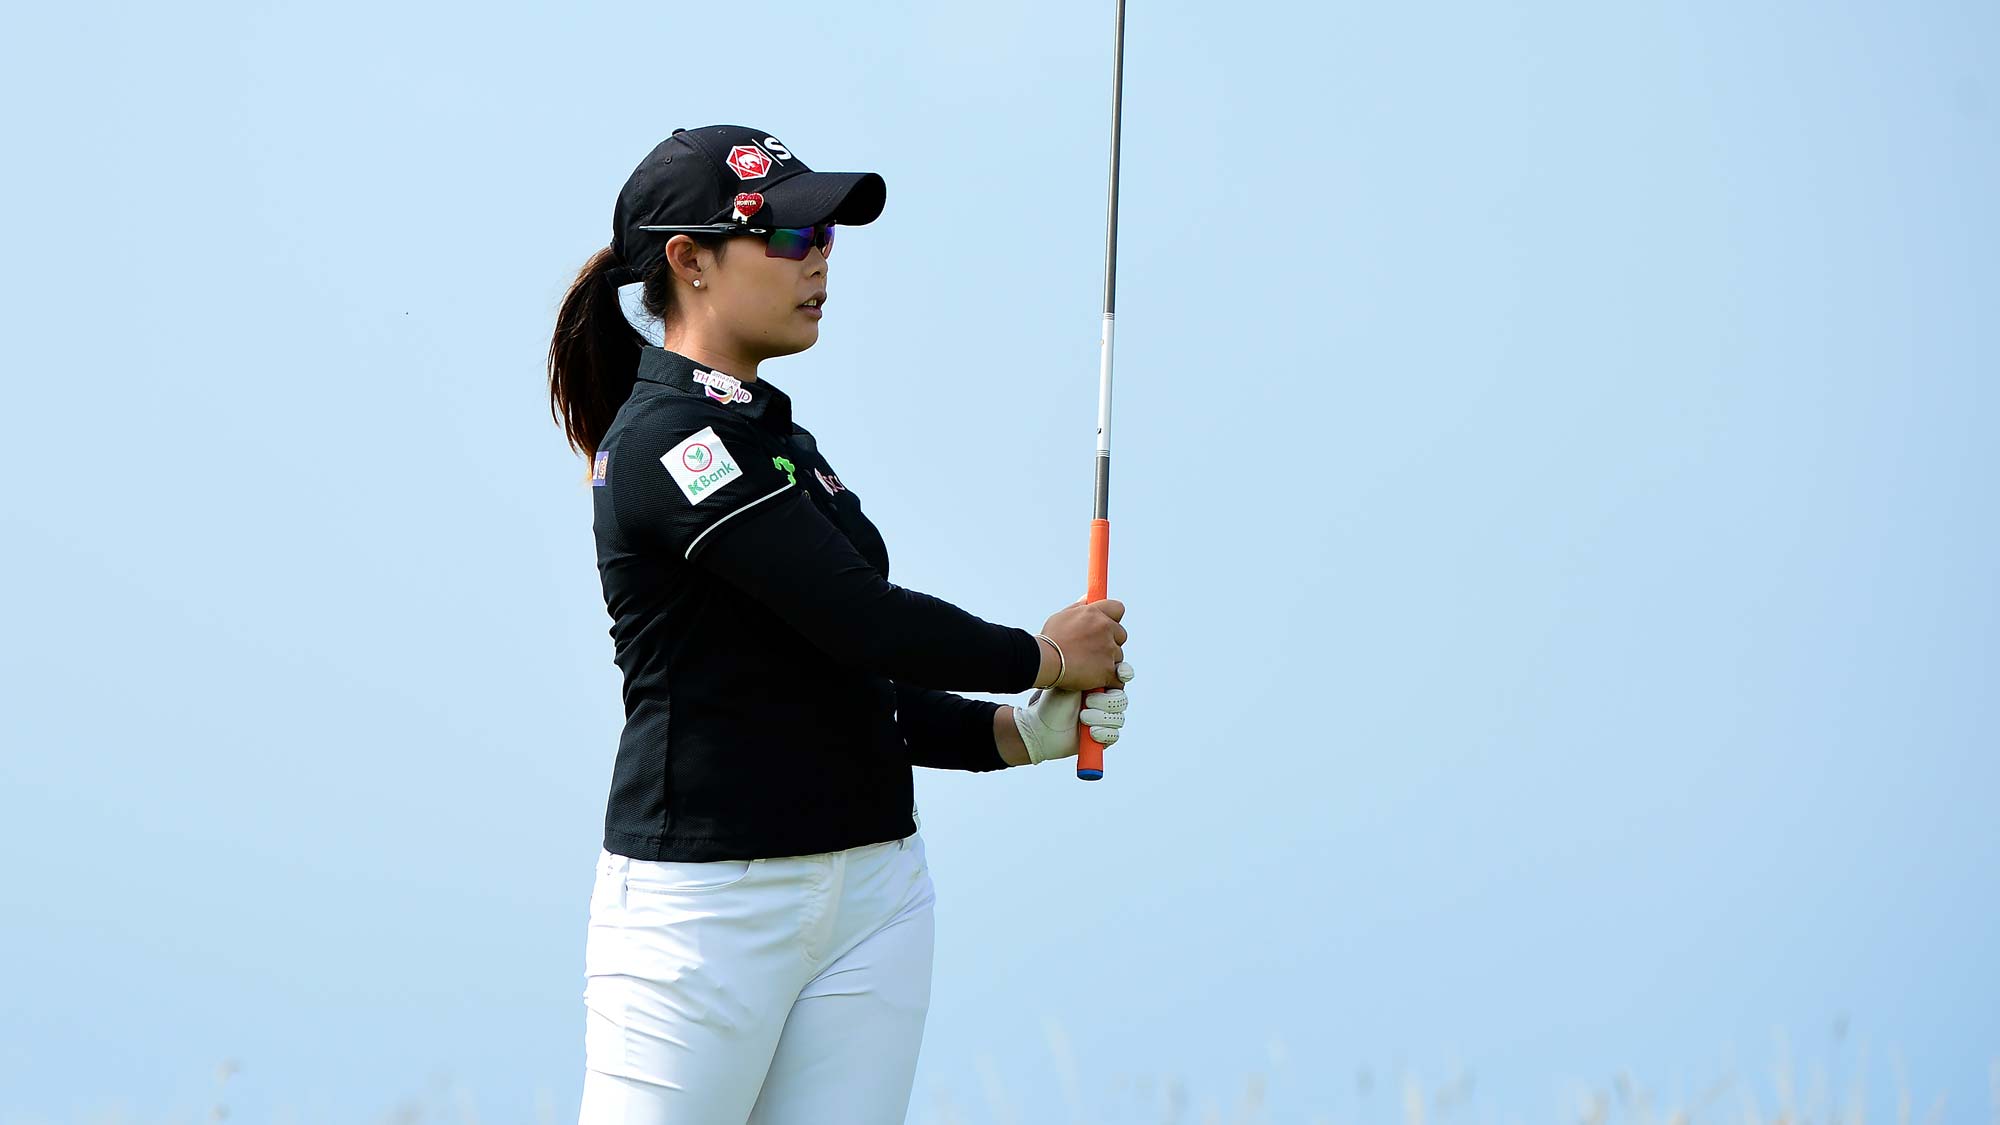 Moriya Jutanugarm of Thailand plays her tee shot to the 3rd hole during the Aberdeen Standard Investment Scottish Open